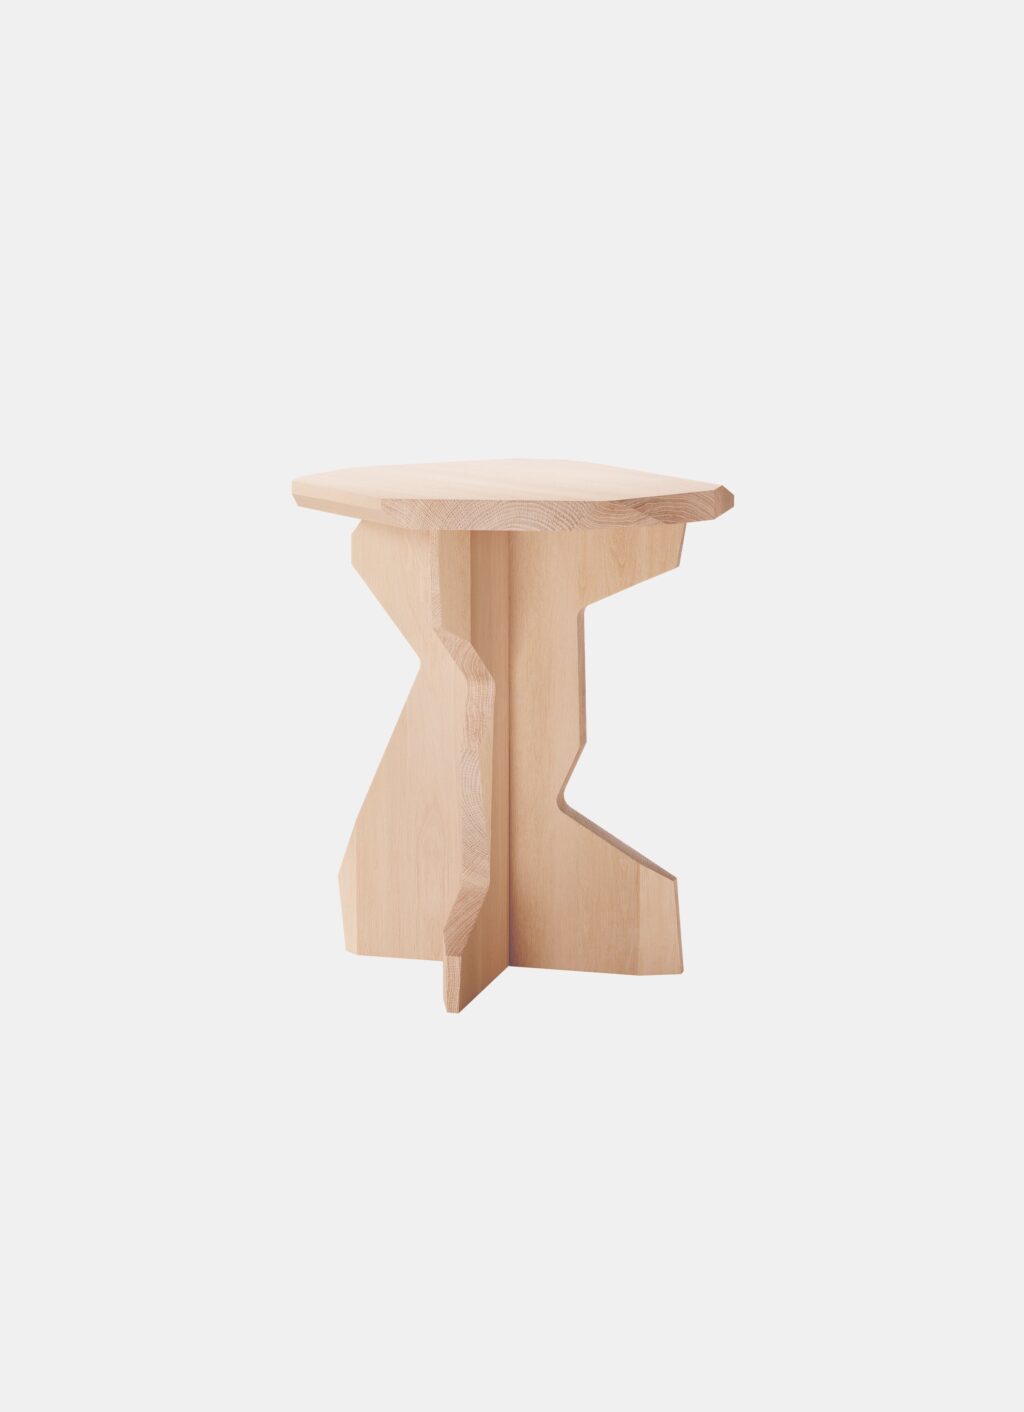 Objekte unserer Tage - OUT - Fels - Stool - various woods